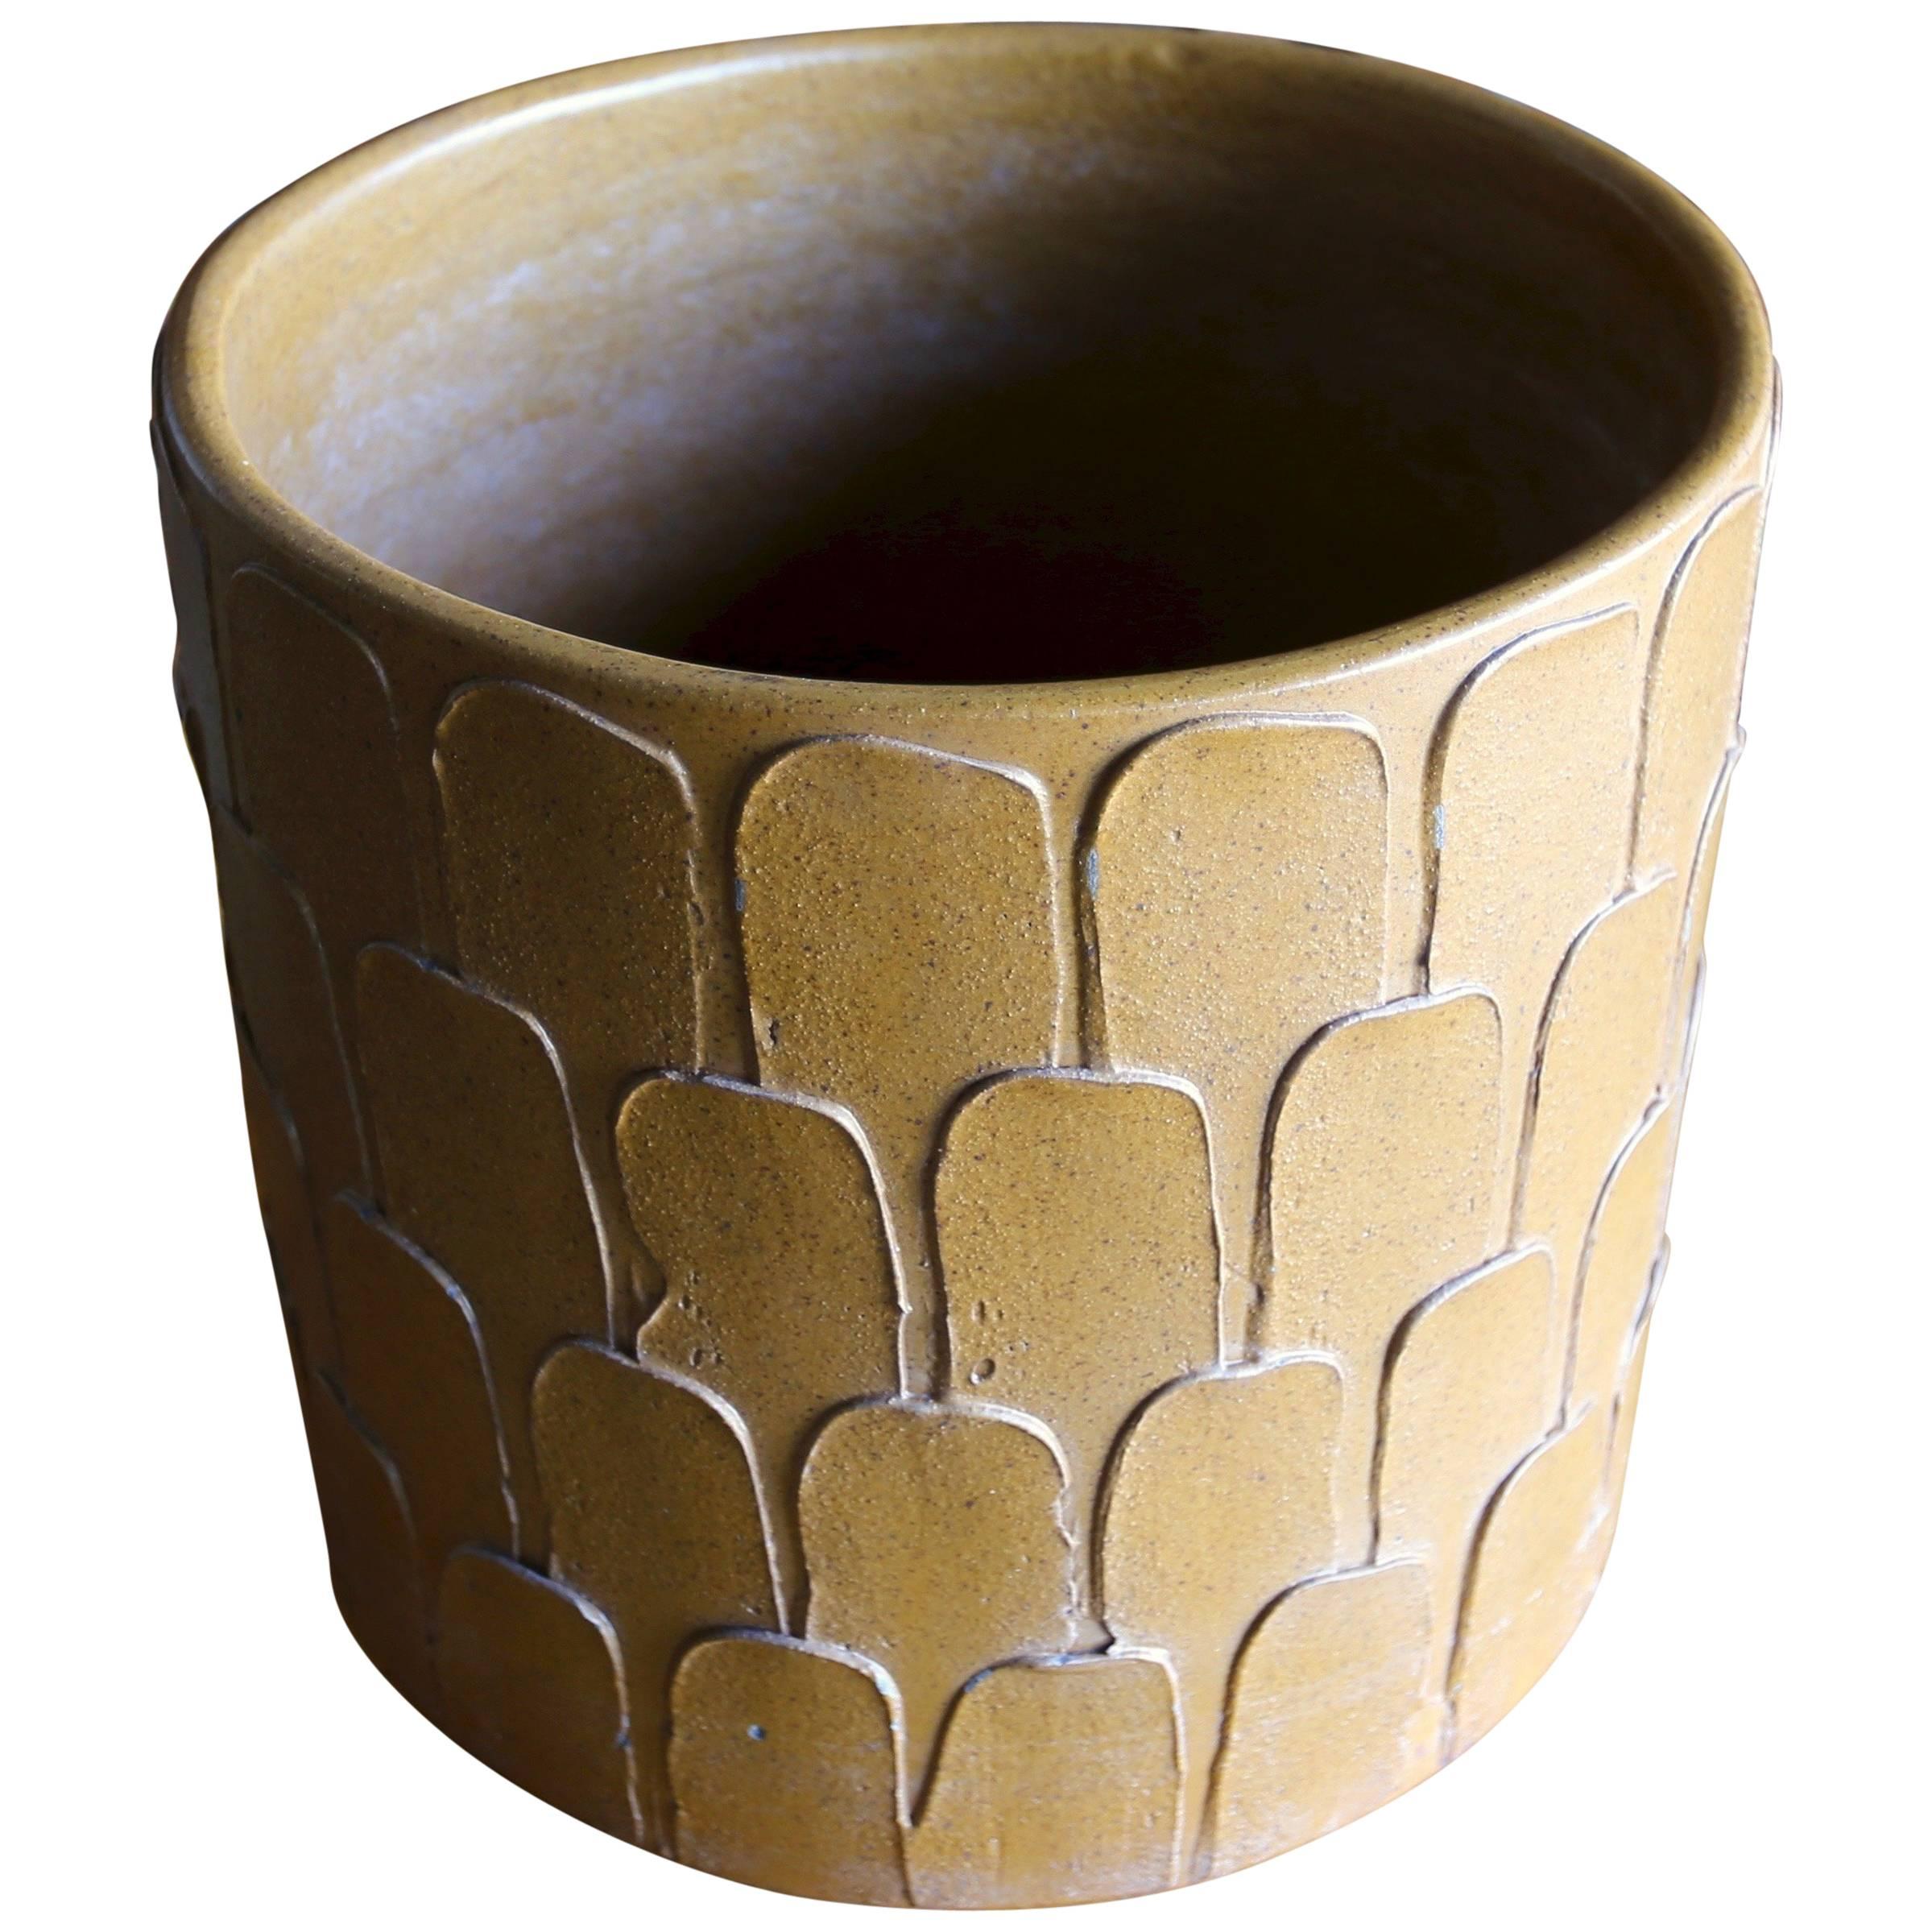 "Leaf Pattern" Planter by David Cressey for Architectural Pottery